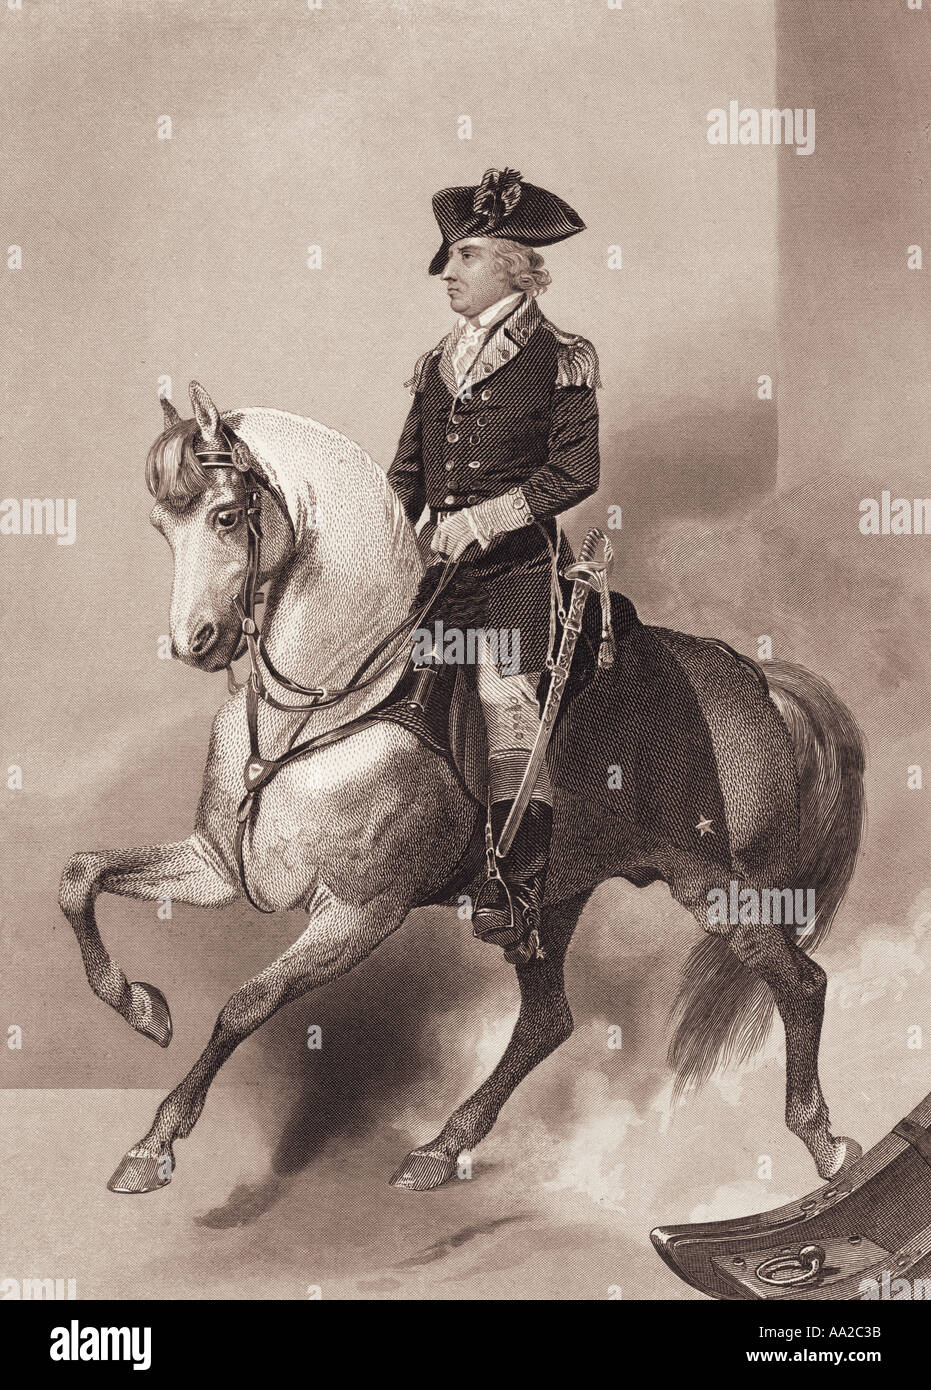 Portrait of General Horatio Gates, American military officer during the American Revolutionary War. Stock Photo